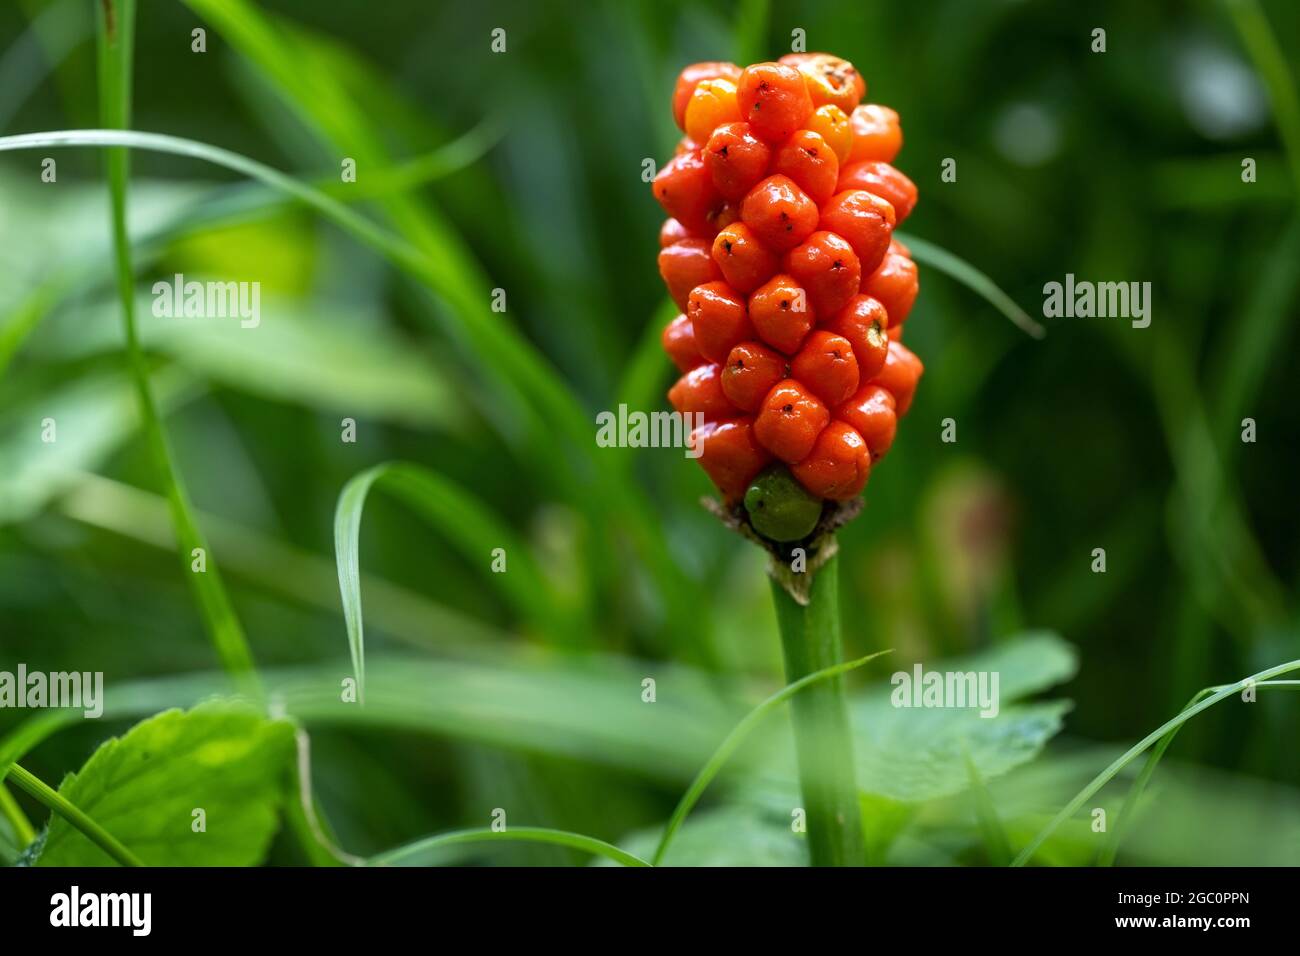 Arum maculatum with red berries against a green background, a poisonous woodland plant also named Cuckoo Pint or Lords and Ladies, copy space, selecte Stock Photo